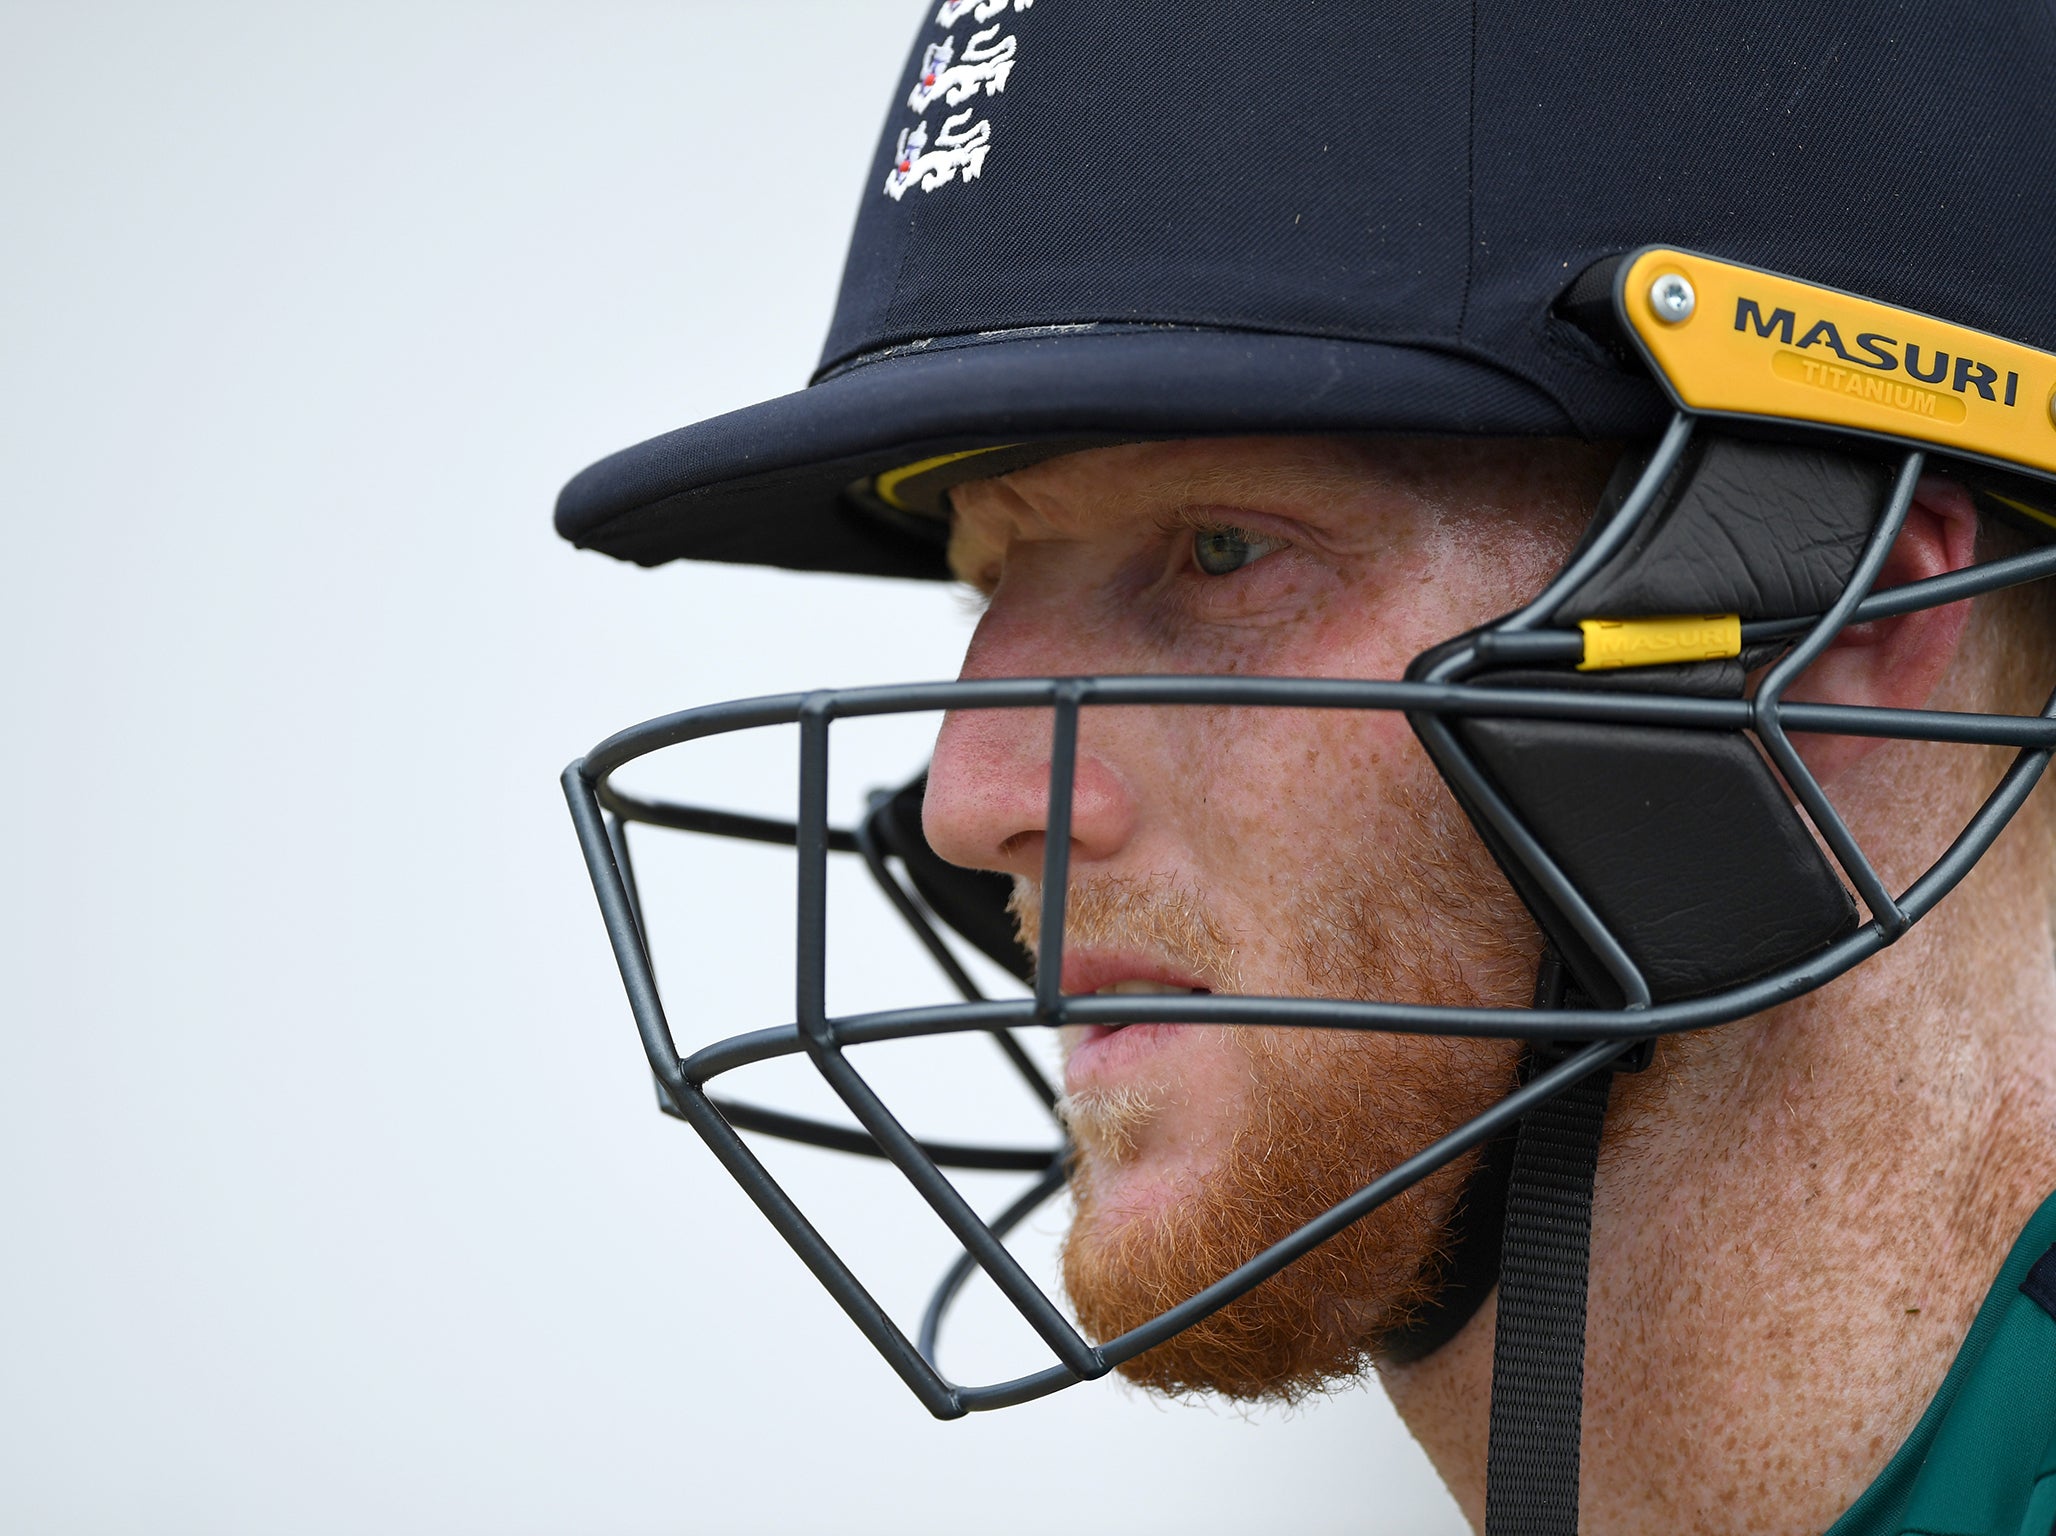 Ben Stokes has lost one of his key personal sponsors following the incident in Bristol